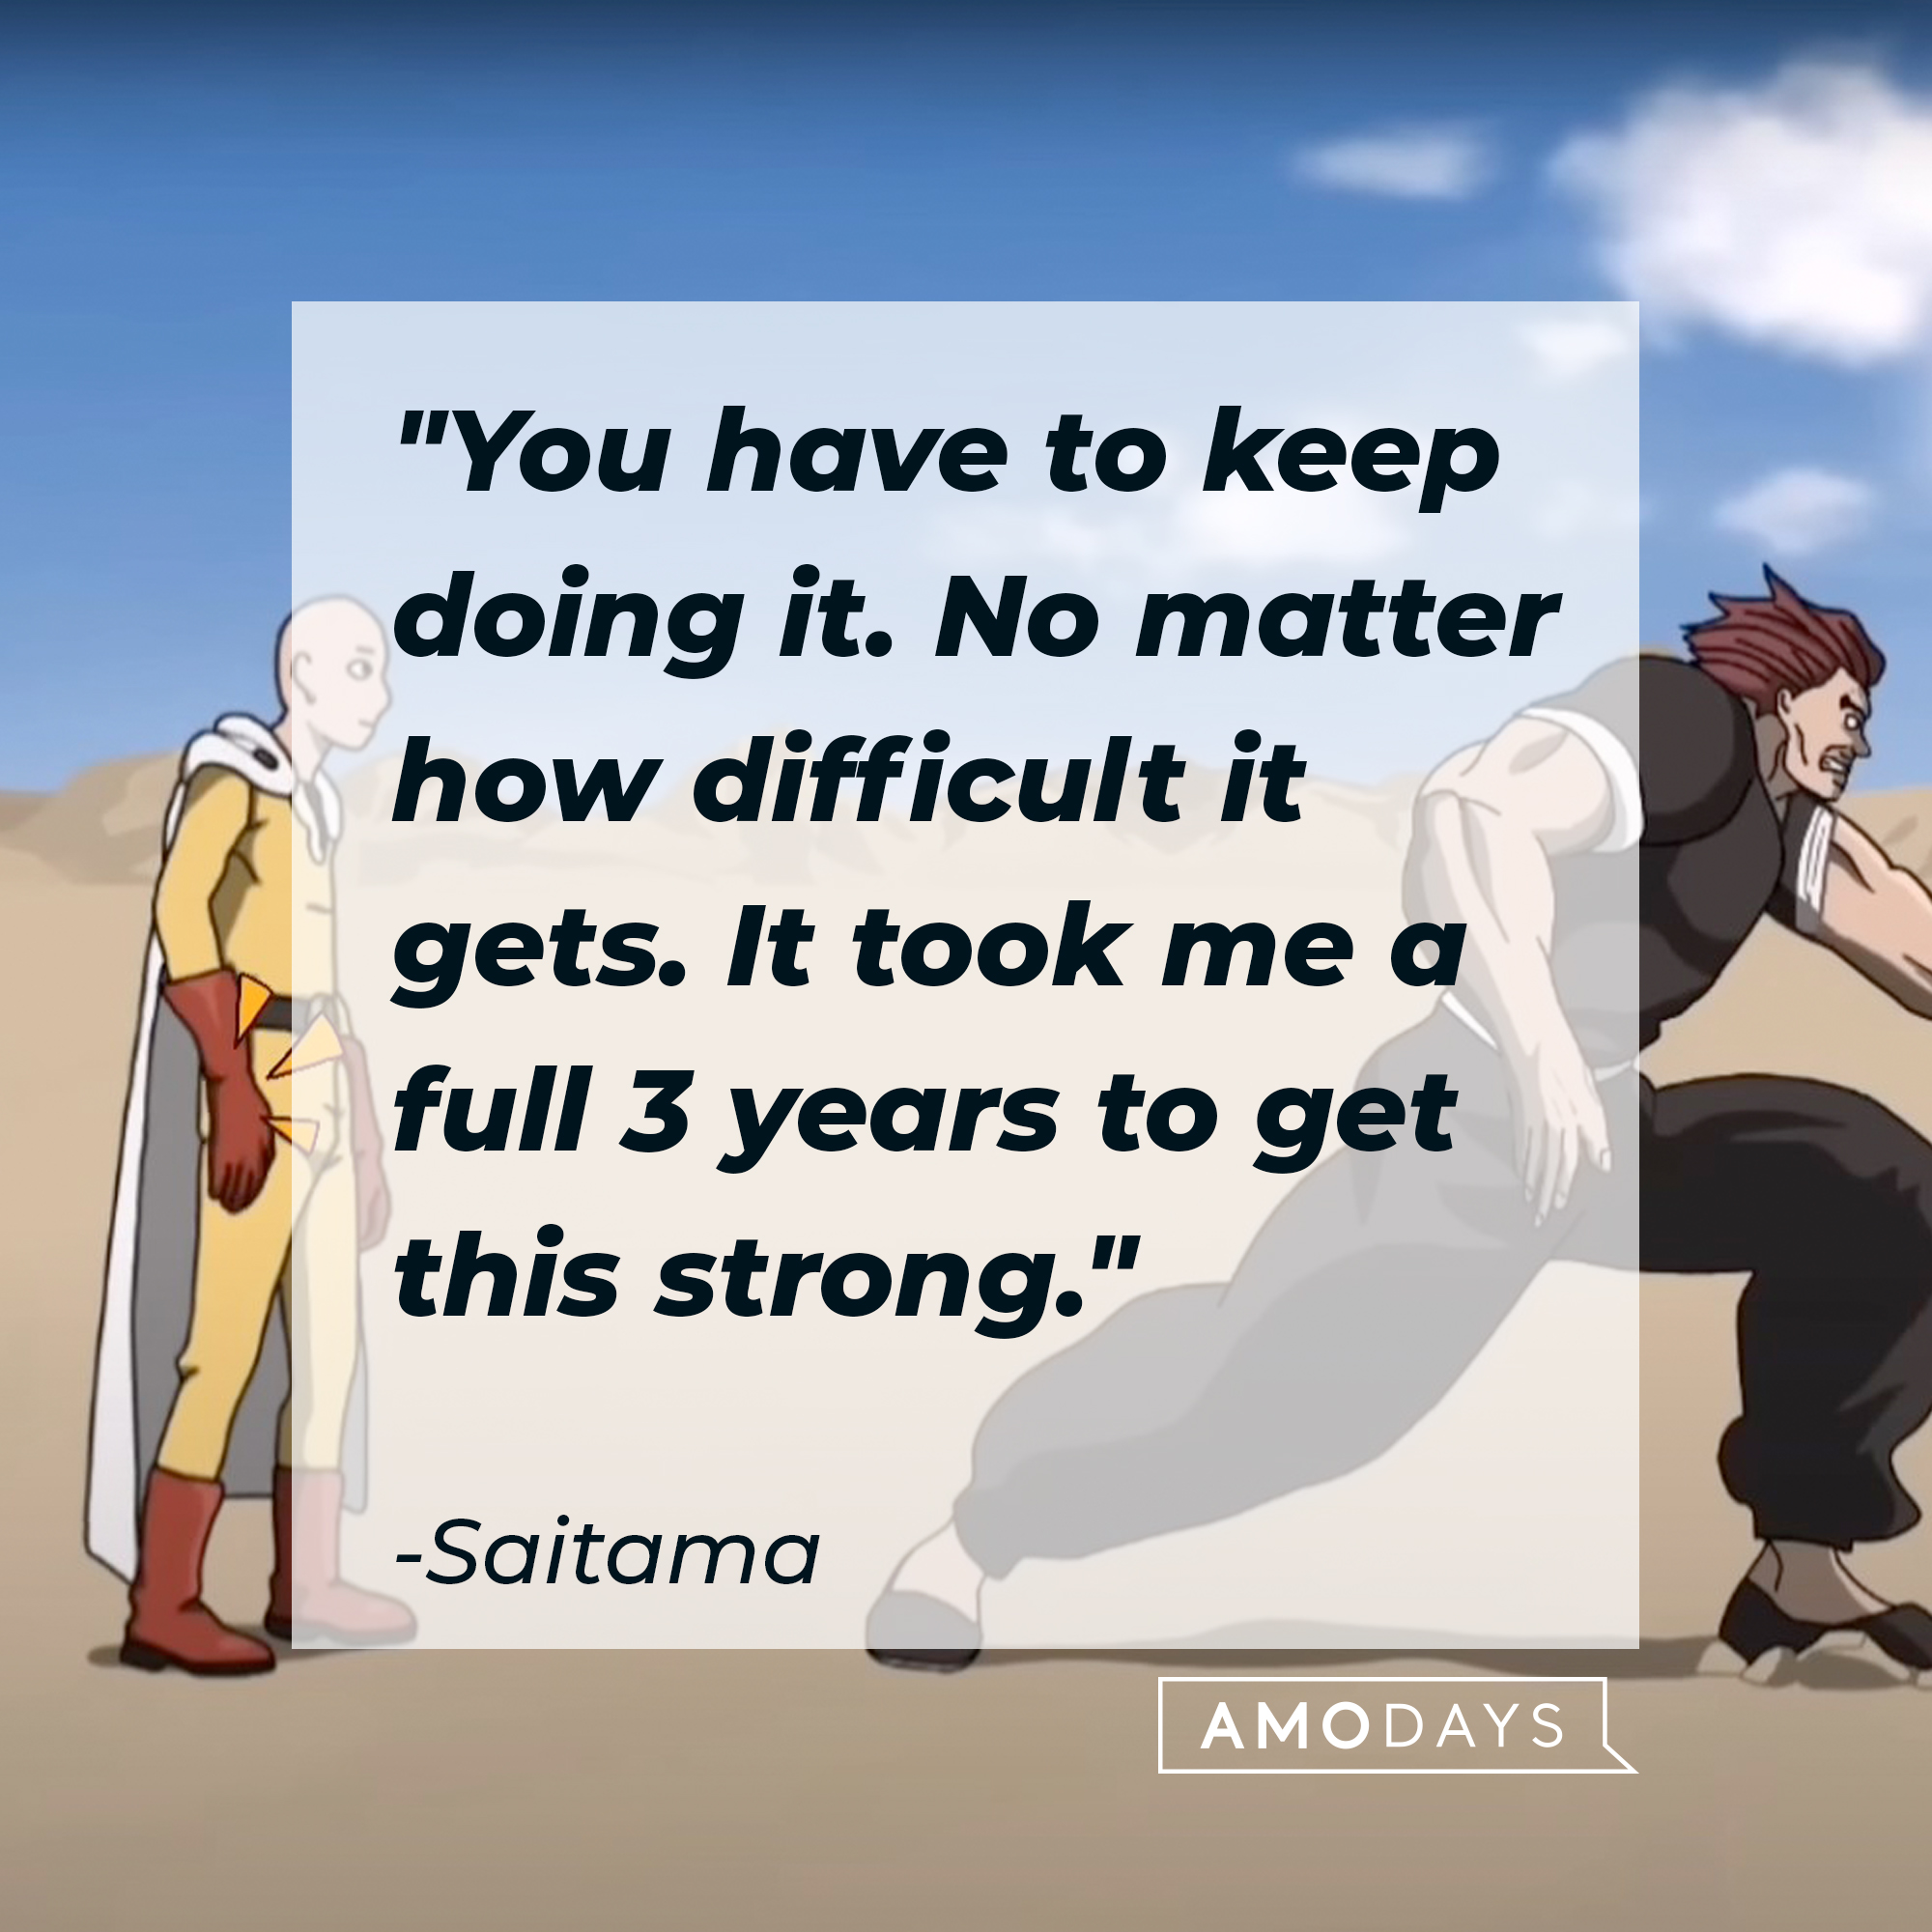 Saitama's quote: "You have to keep doing it. No matter how difficult it gets. It took me a full 3 years to get this strong." | Source: Facebook.com/OnePunchManMobileSEAEN